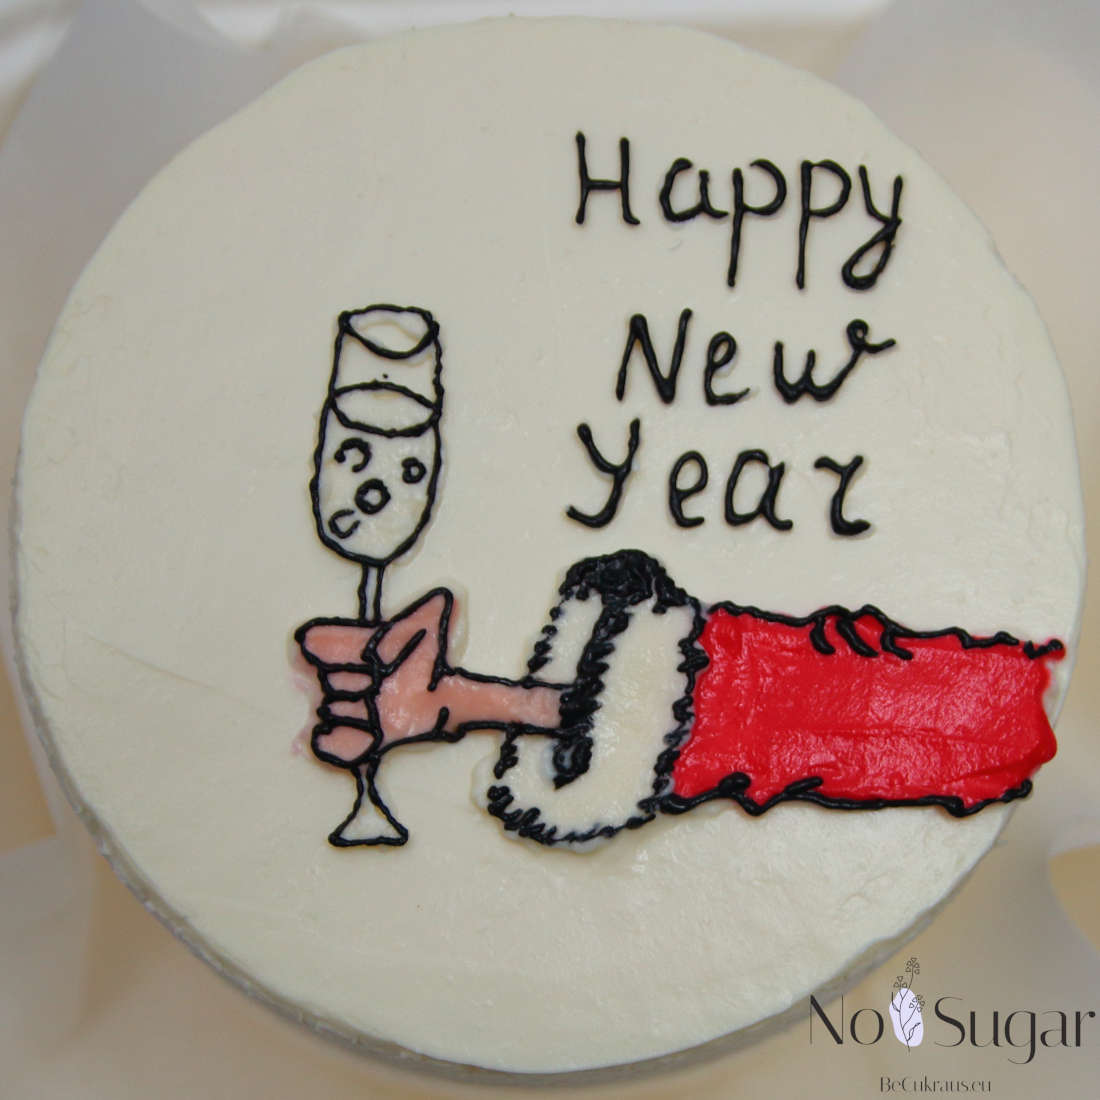 Champagne on a Happy New Year bento cake